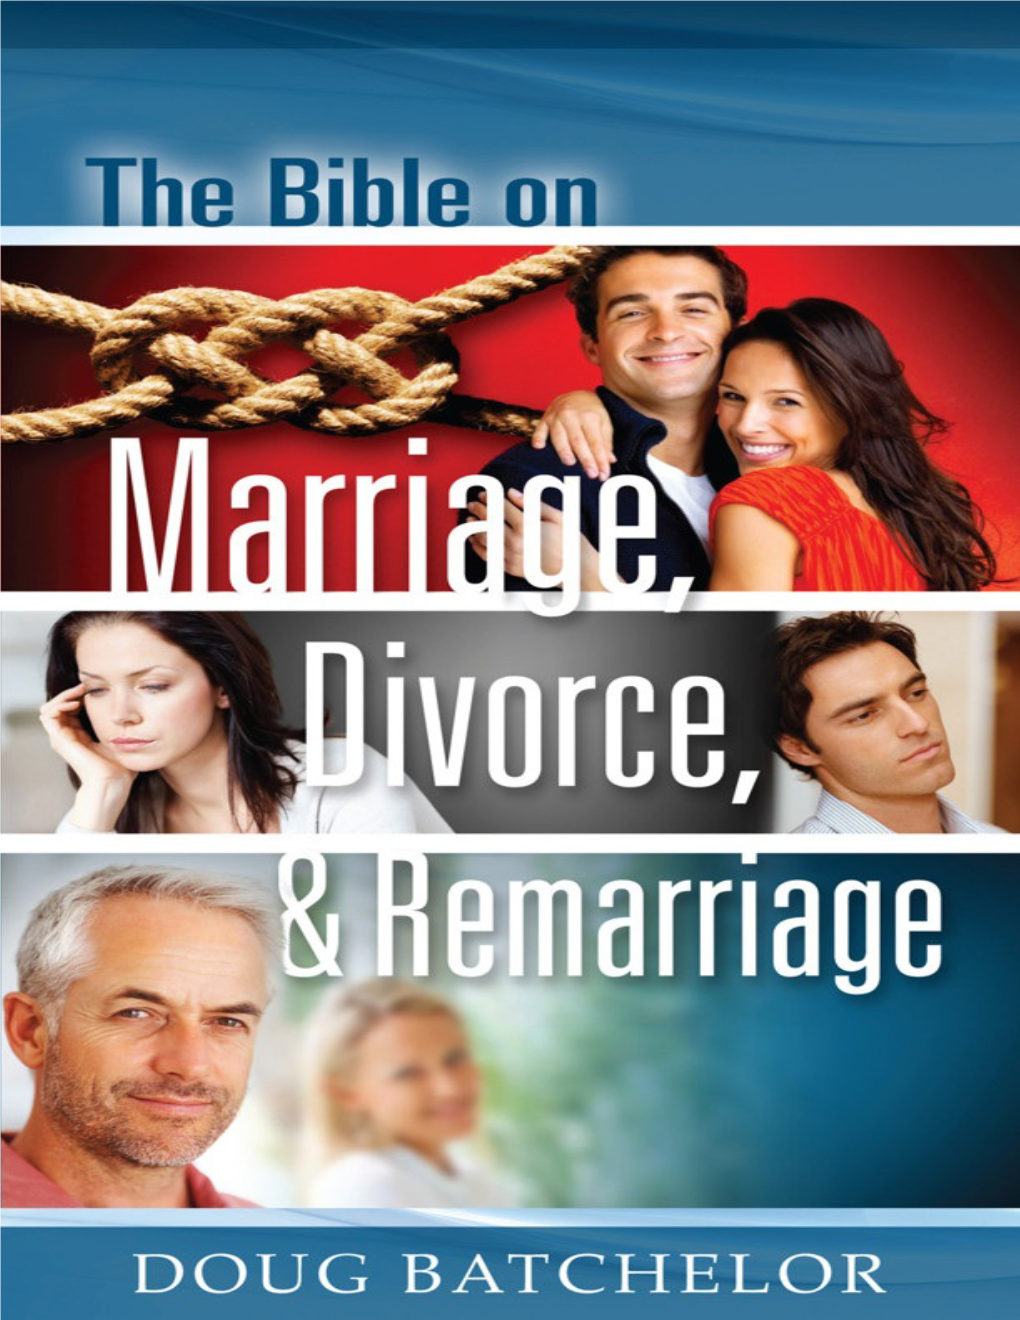 Amazing Facts Book Doug Batchelor the Bible on Marriage Divorce and Remarriage